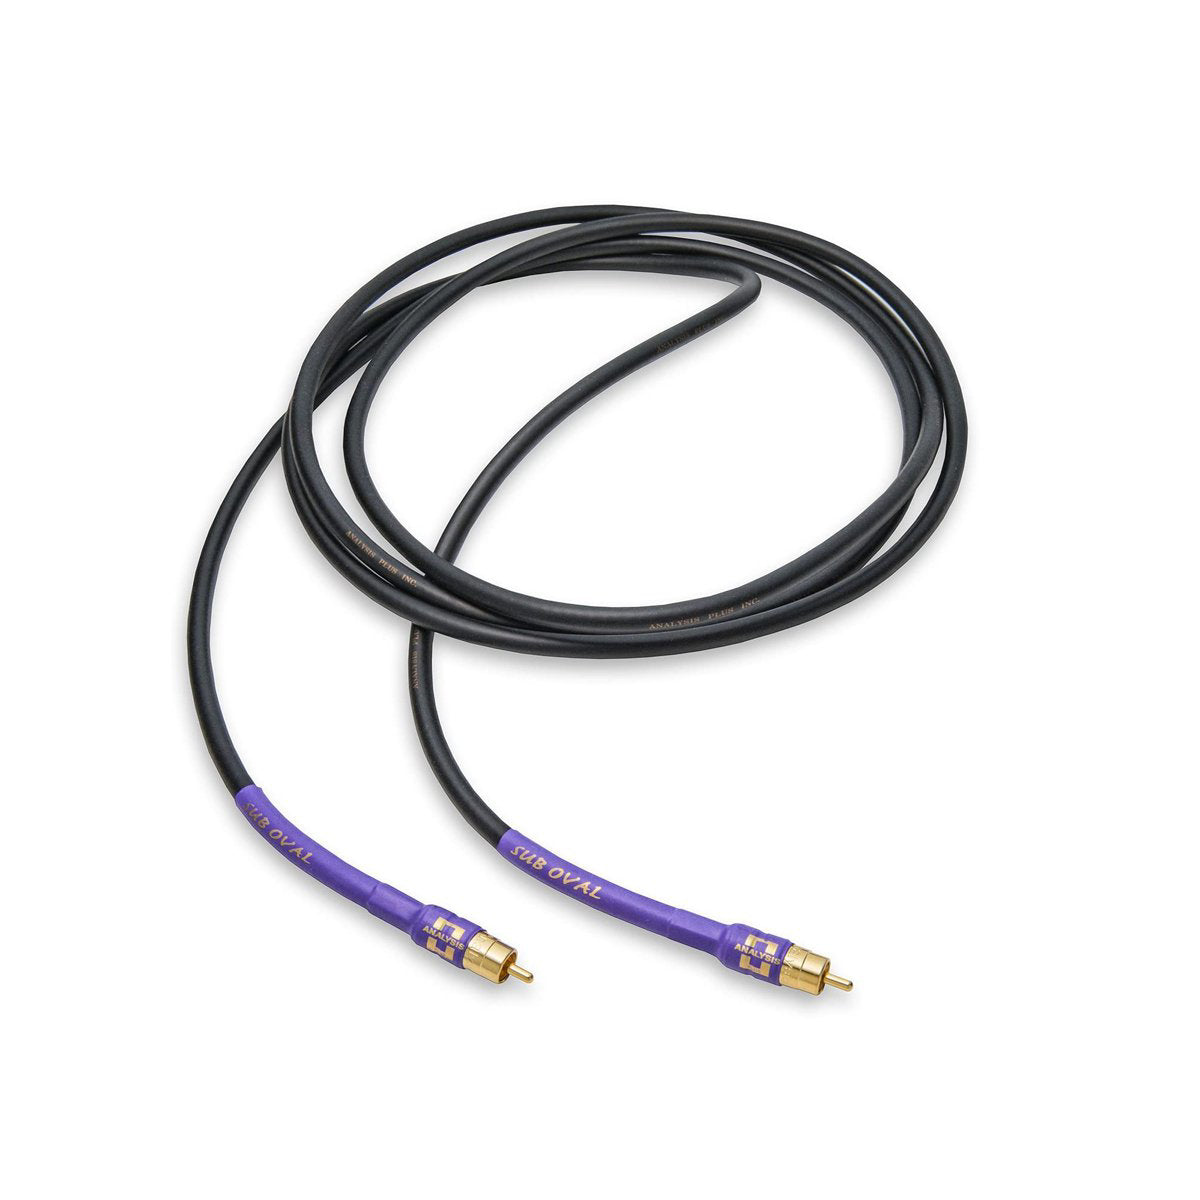 Analysis Plus Sub Oval subwoofer cable - The Audio Experts